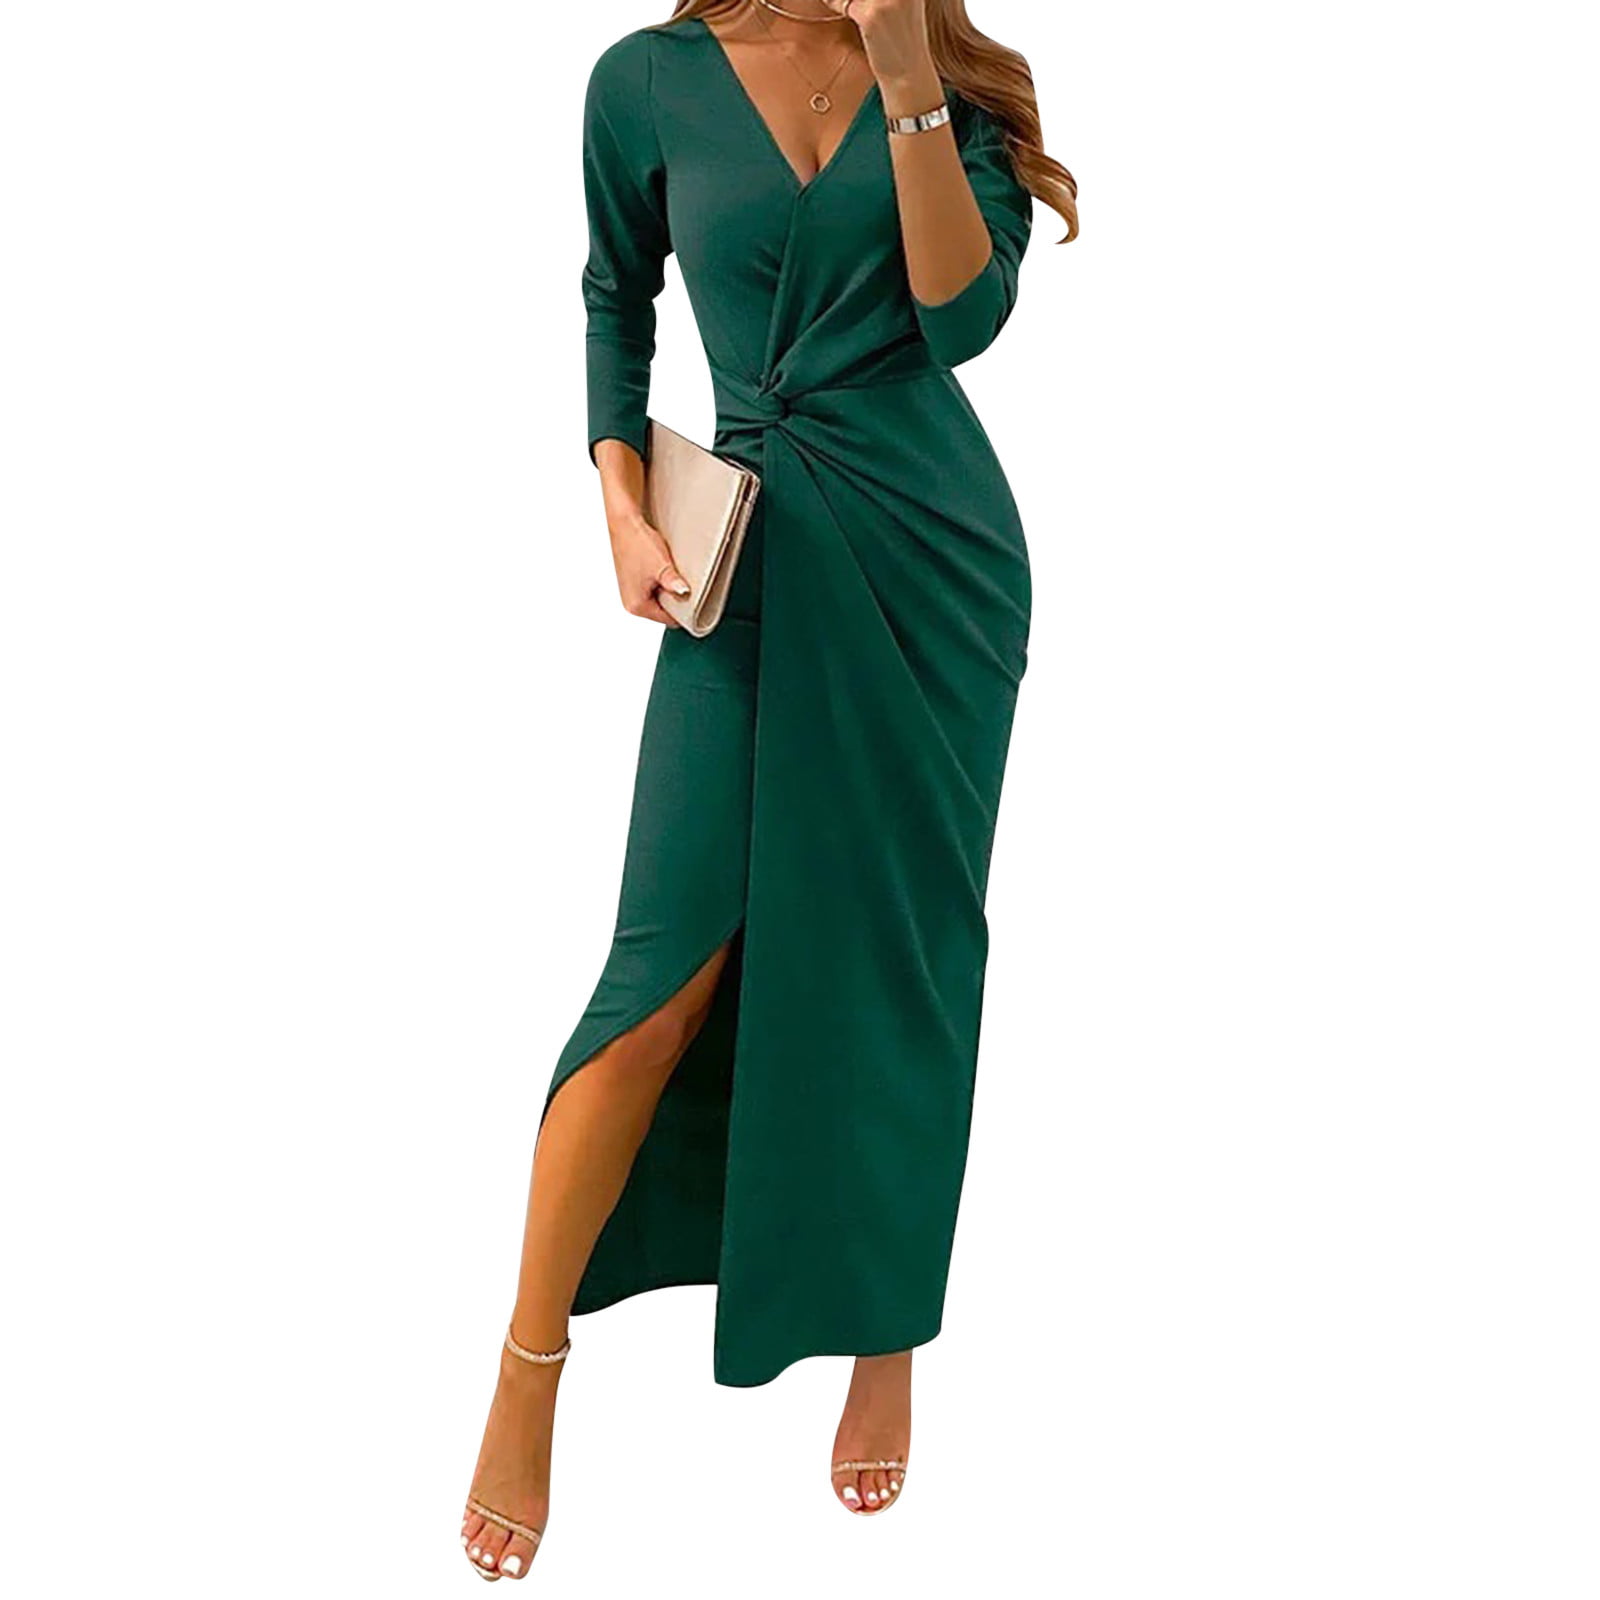 LowProfile Wedding Guest Dresses for Women 2023 Winter Fall Long Sleeve V- Neck Floral Midi Summer Beach Ruffle Holiday Sun Fashion Cocktail Dress  Green L 